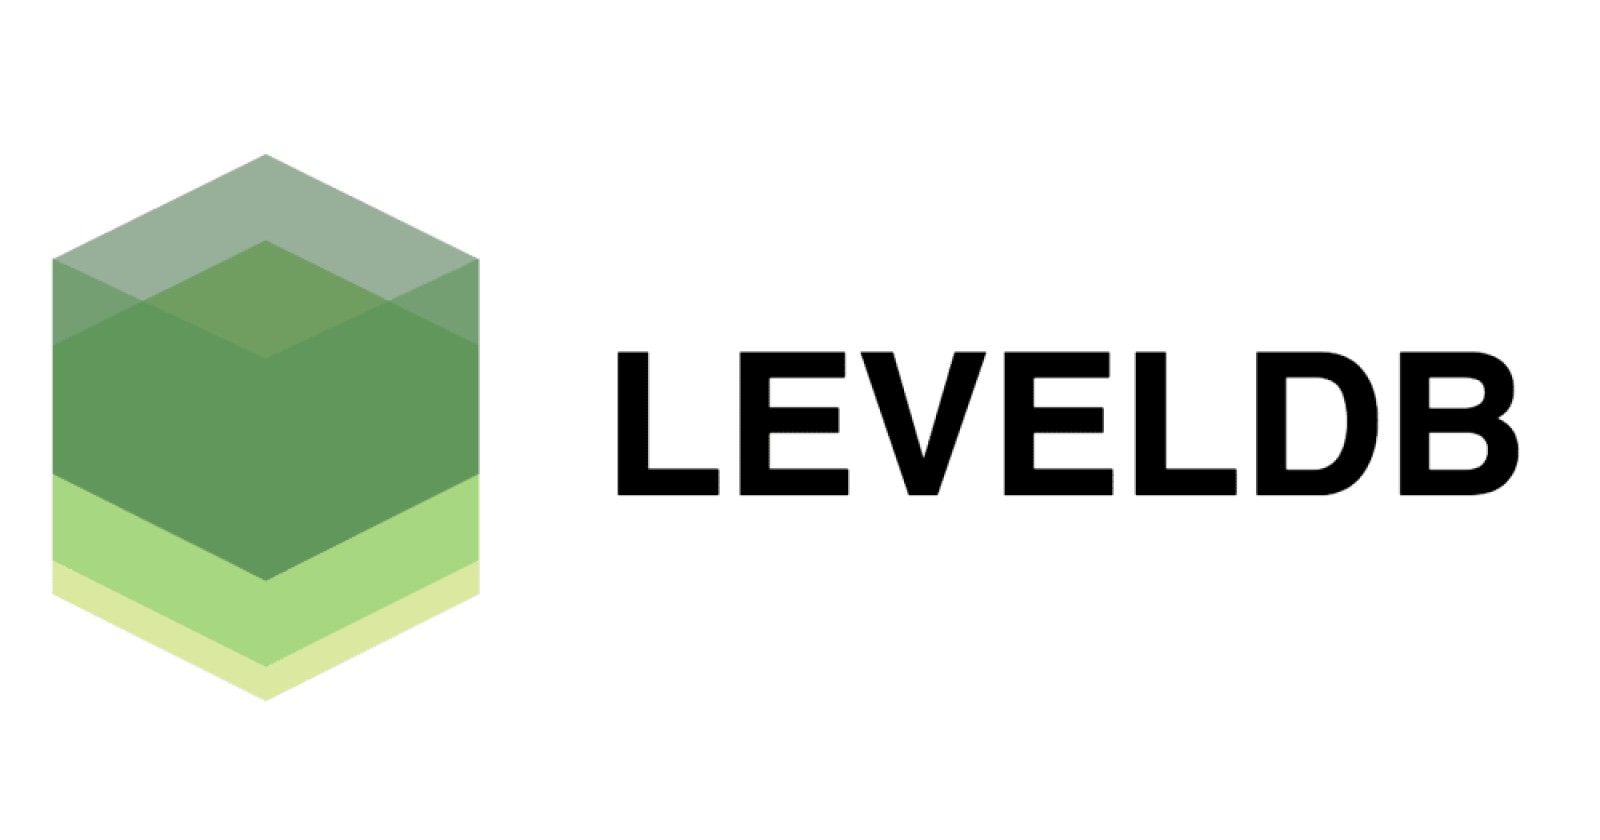 Why do cryptocurrencies use LevelDB?